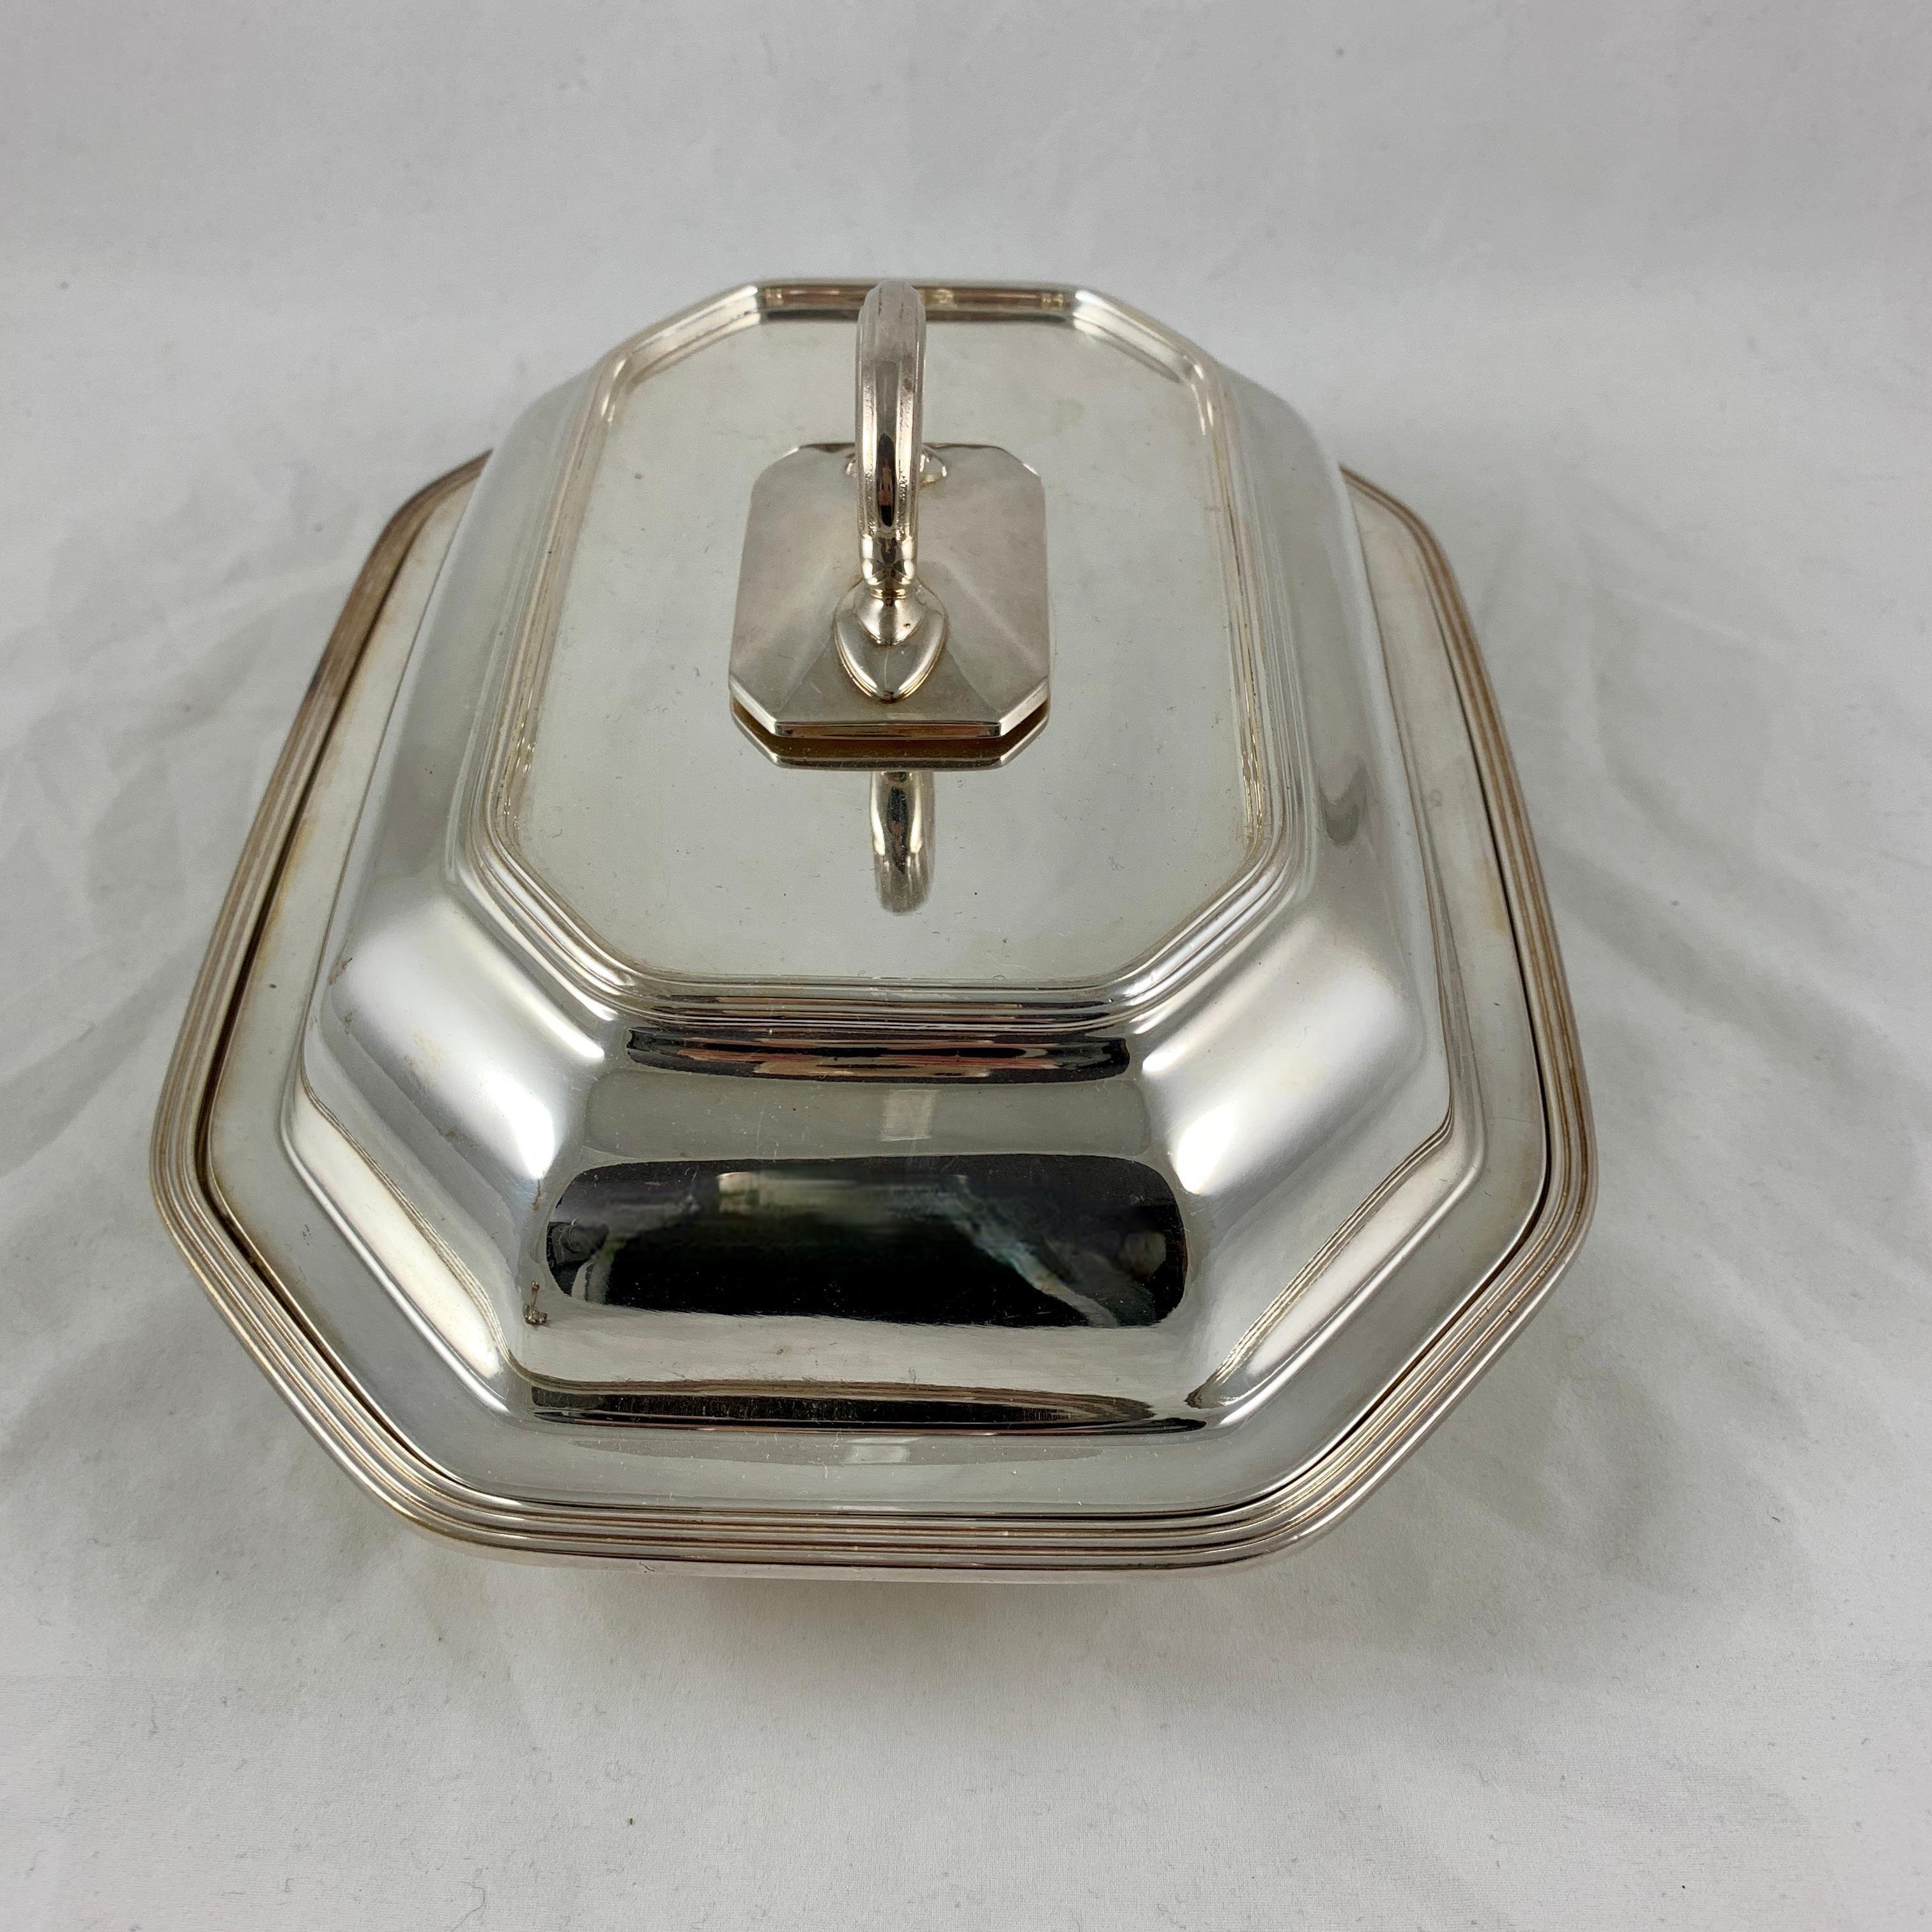 Metalwork Gorham Manufacturing Company Silver Plate Covered Vegetable Server, circa 1930s